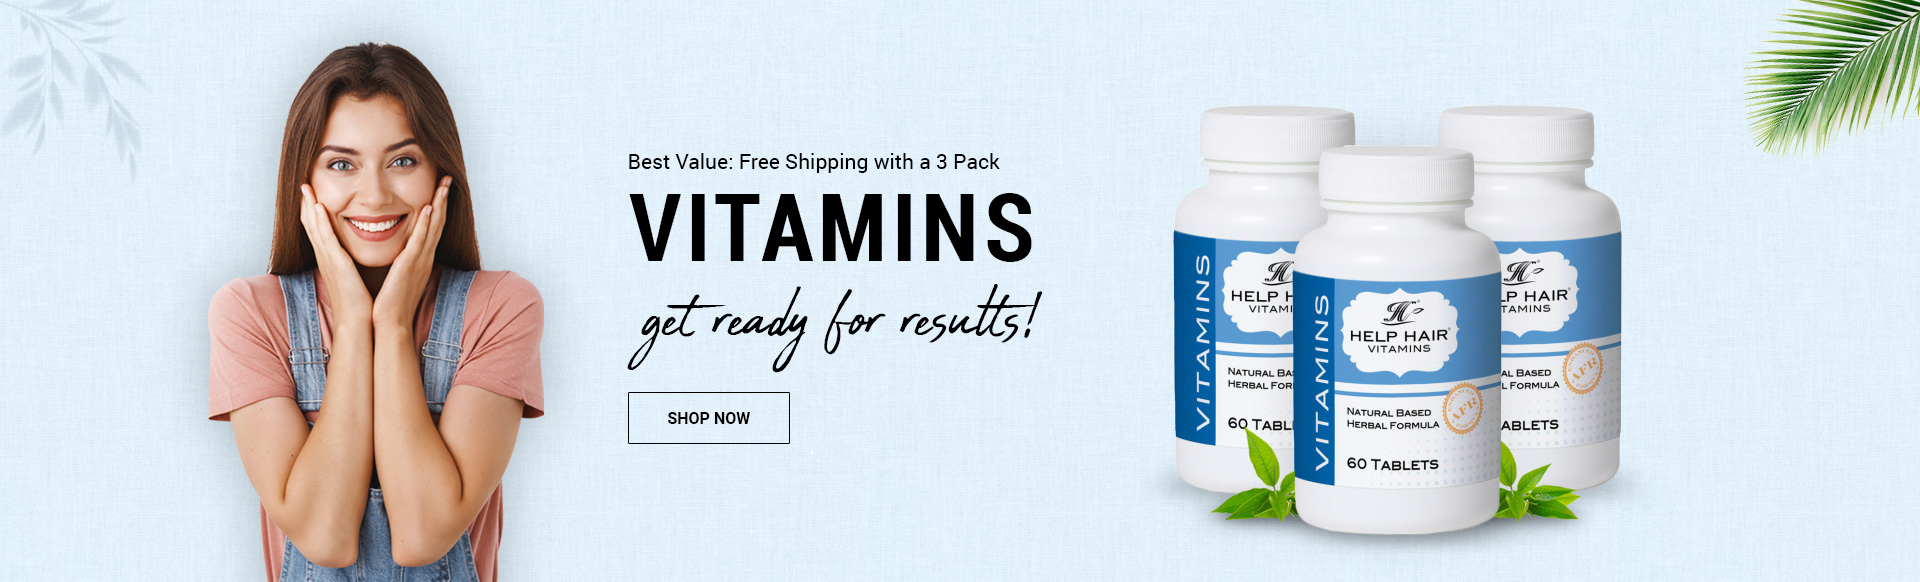 Help Hair Vitamins Products for Men and Women 